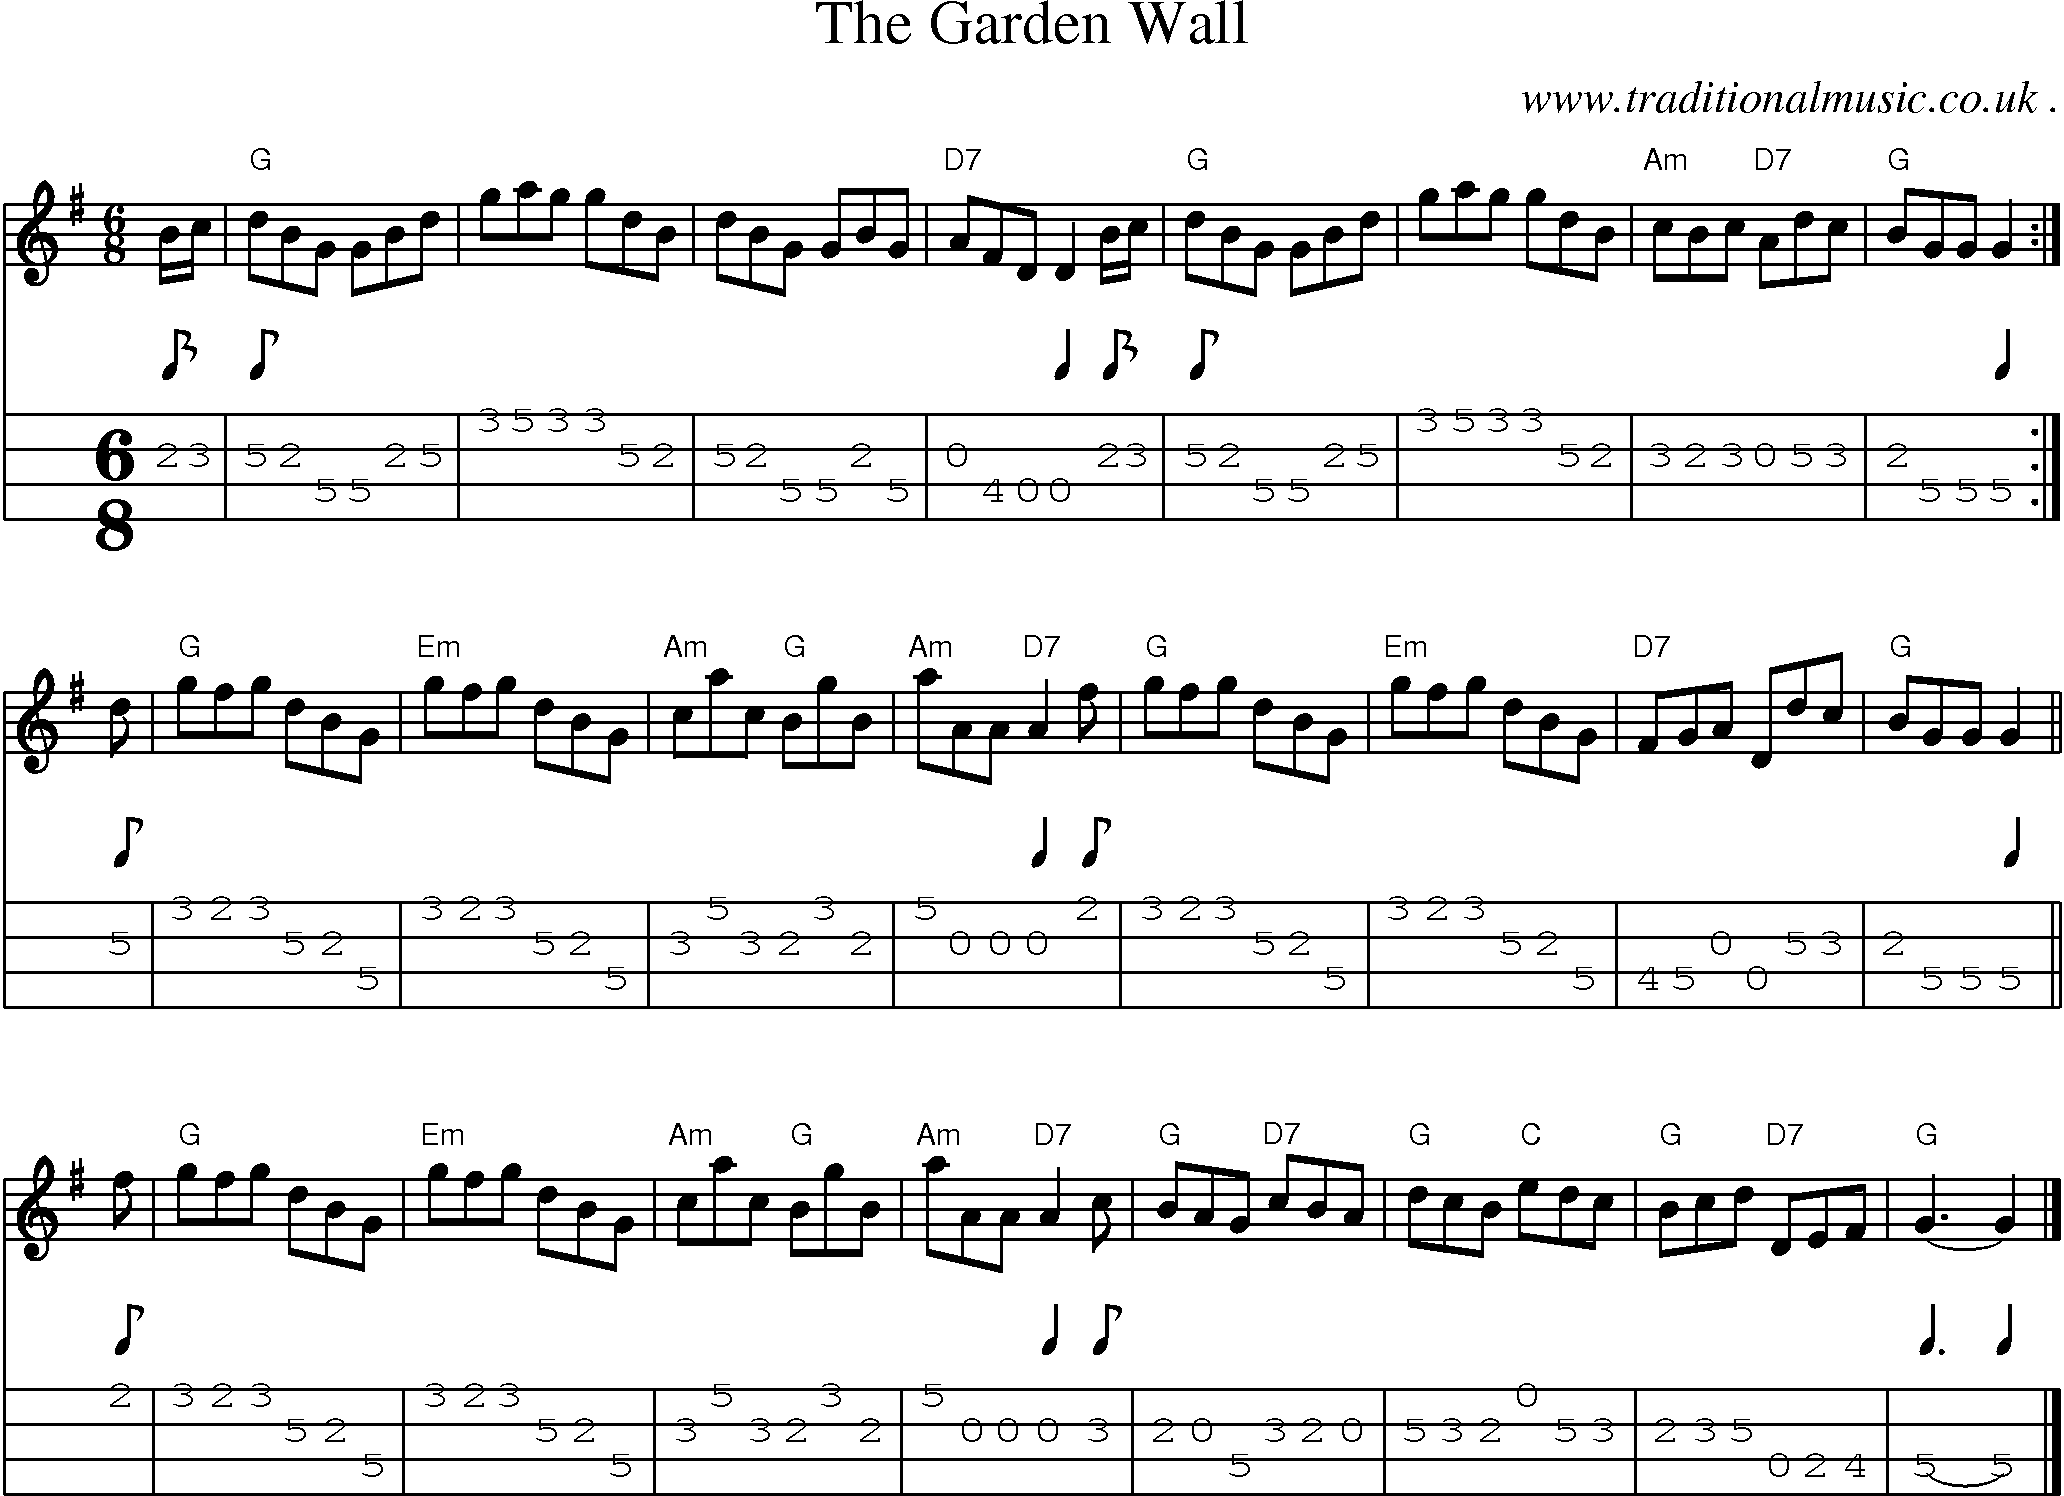 Sheet-music  score, Chords and Mandolin Tabs for The Garden Wall